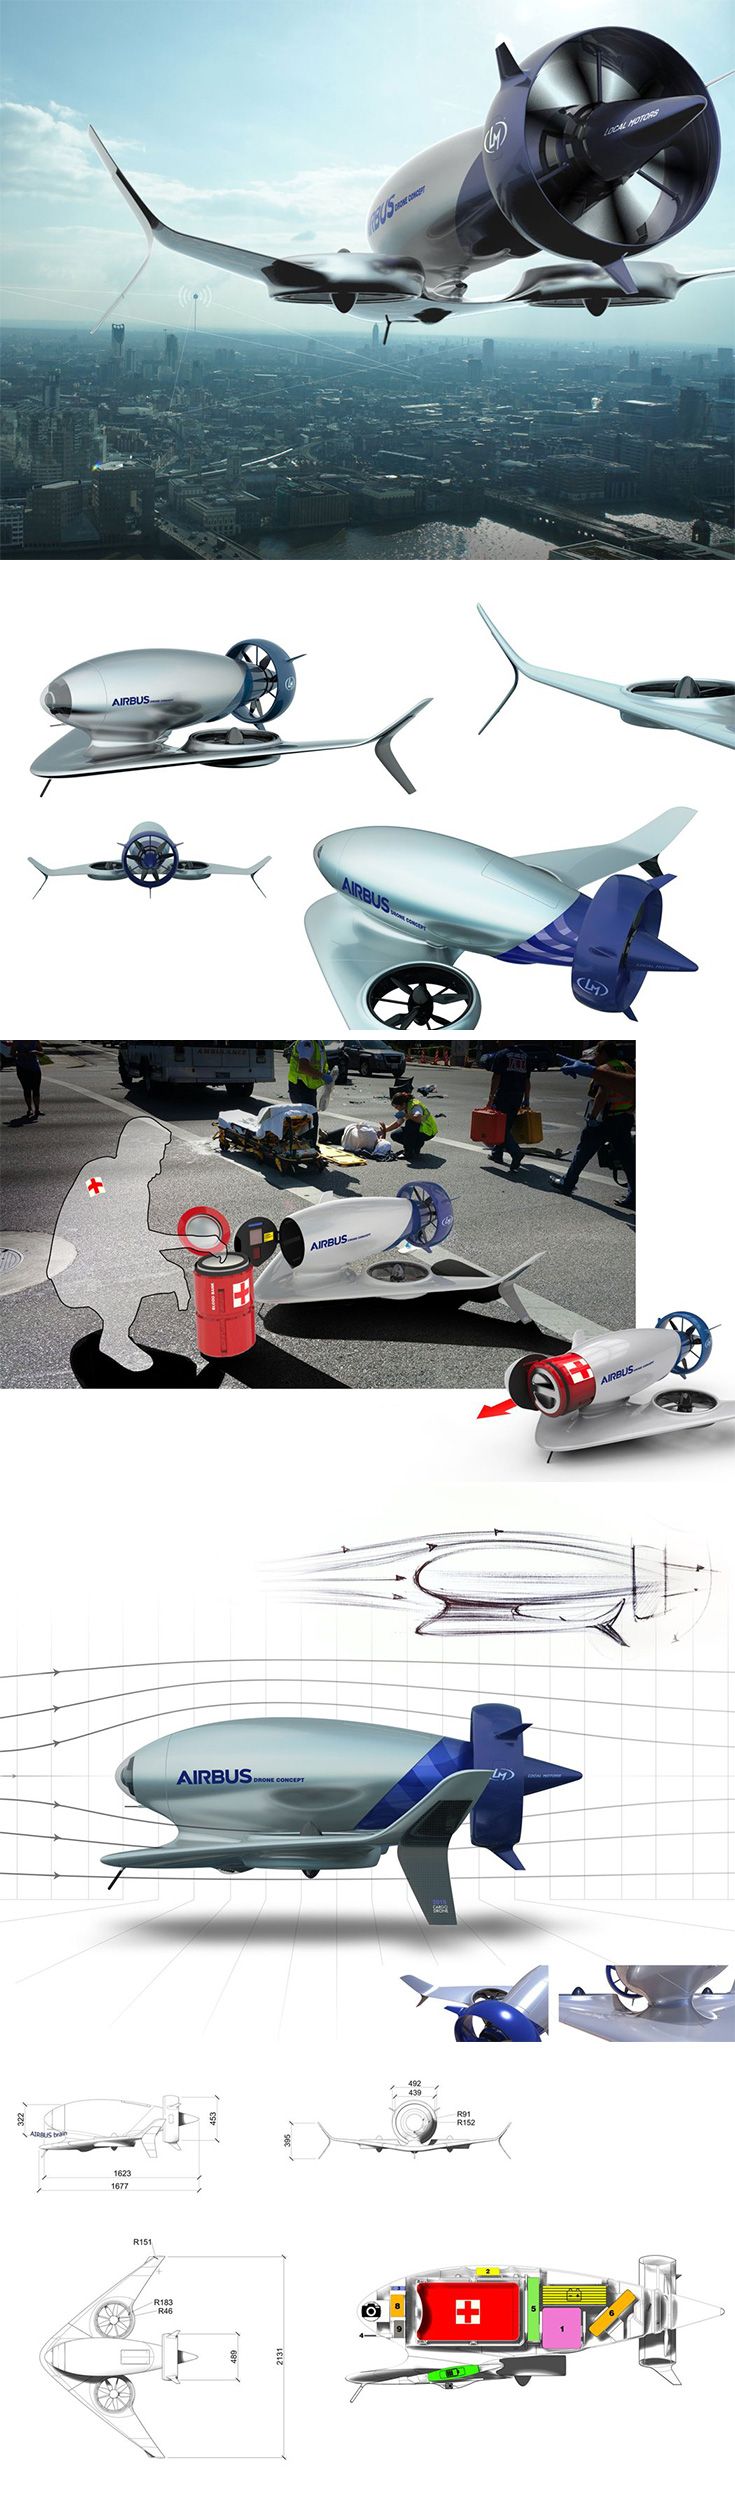 Taking inspiration from Airbus’ existing family of cutting-edge aircraft, the ...